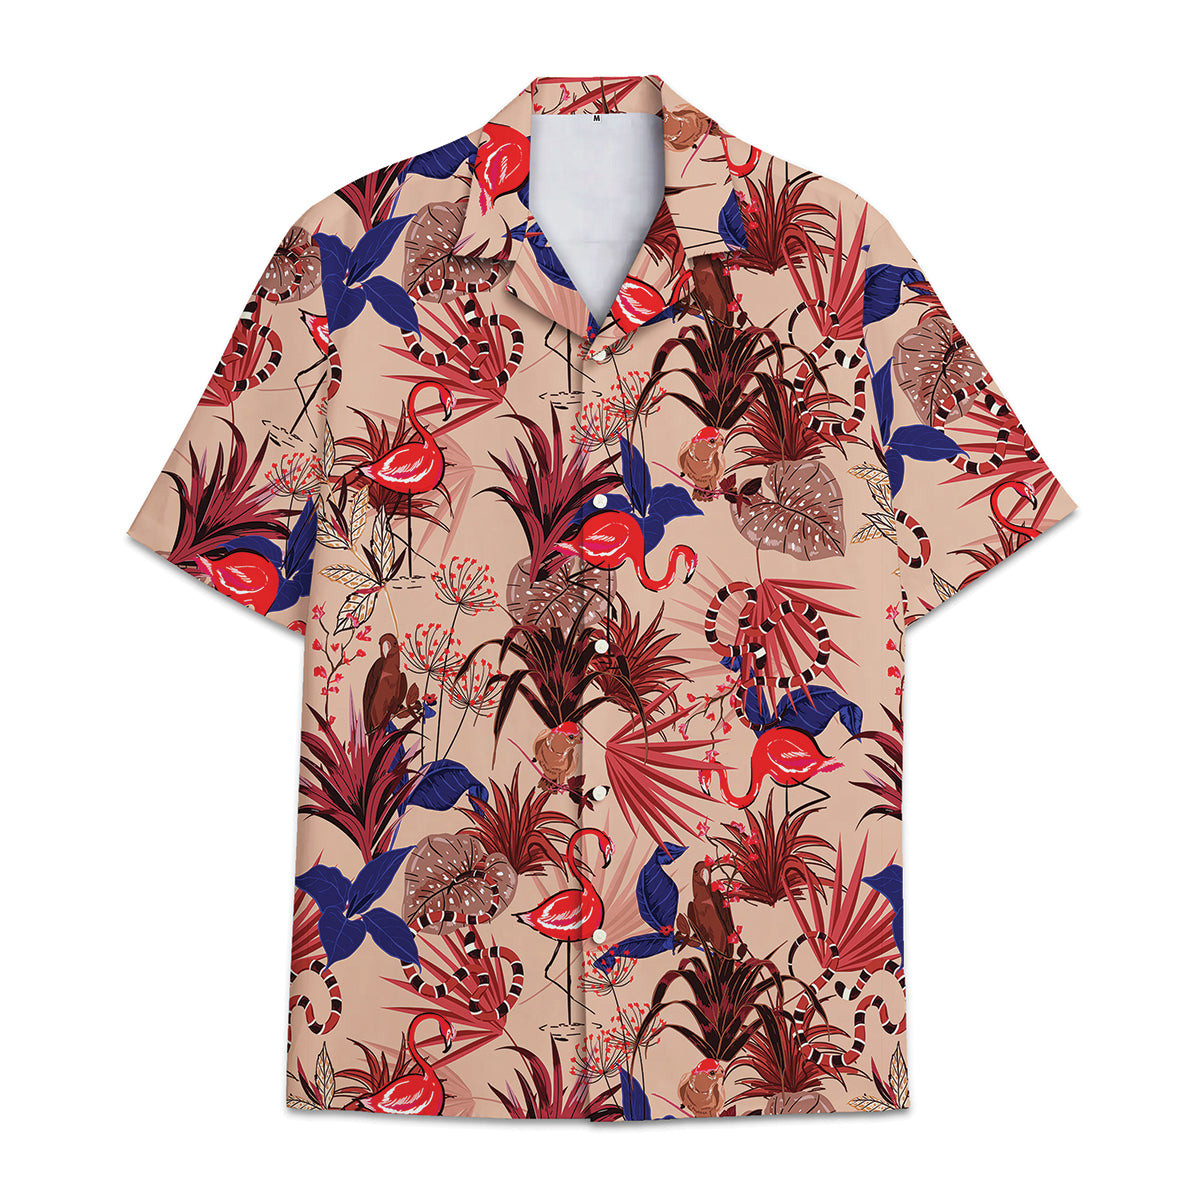 Hawaiian Shirt Tropical Flower And Leaf Tropical Combined With Flamingo